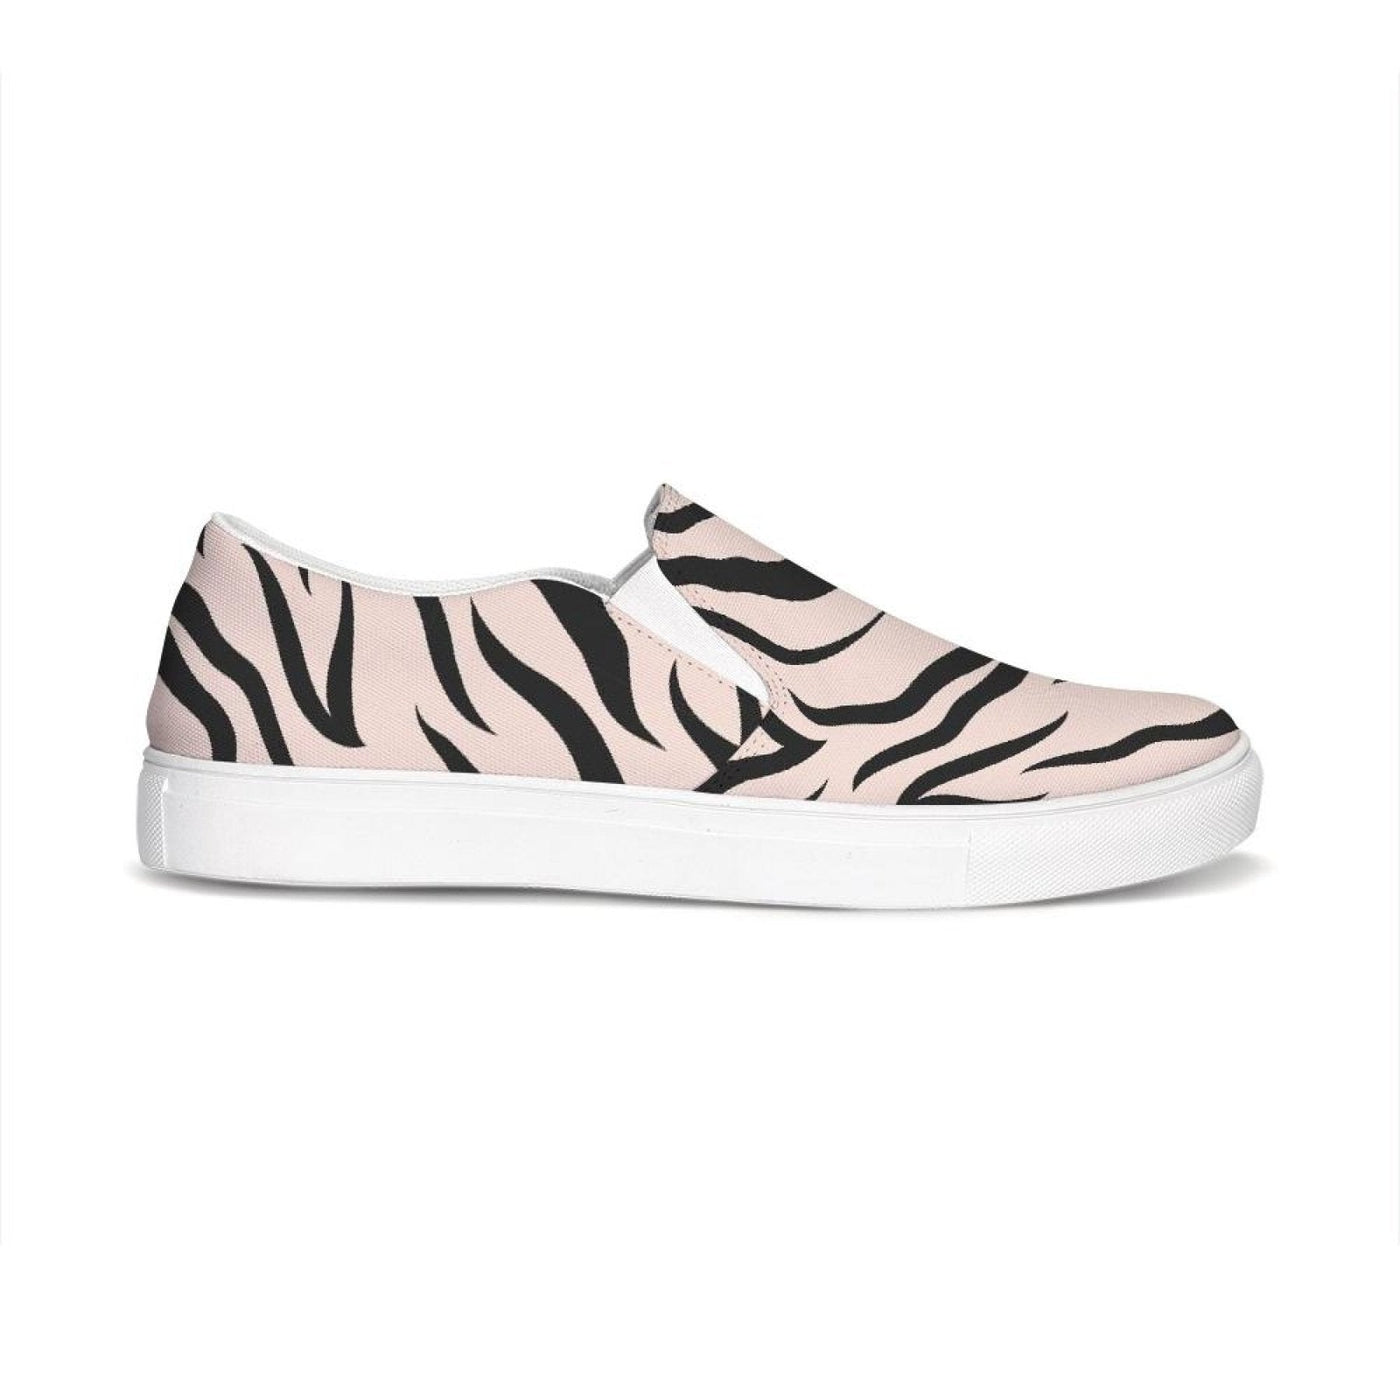 Womens Sneakers - Pink And Black Zebra Stripe Canvas Sports Shoes / Slip-on -